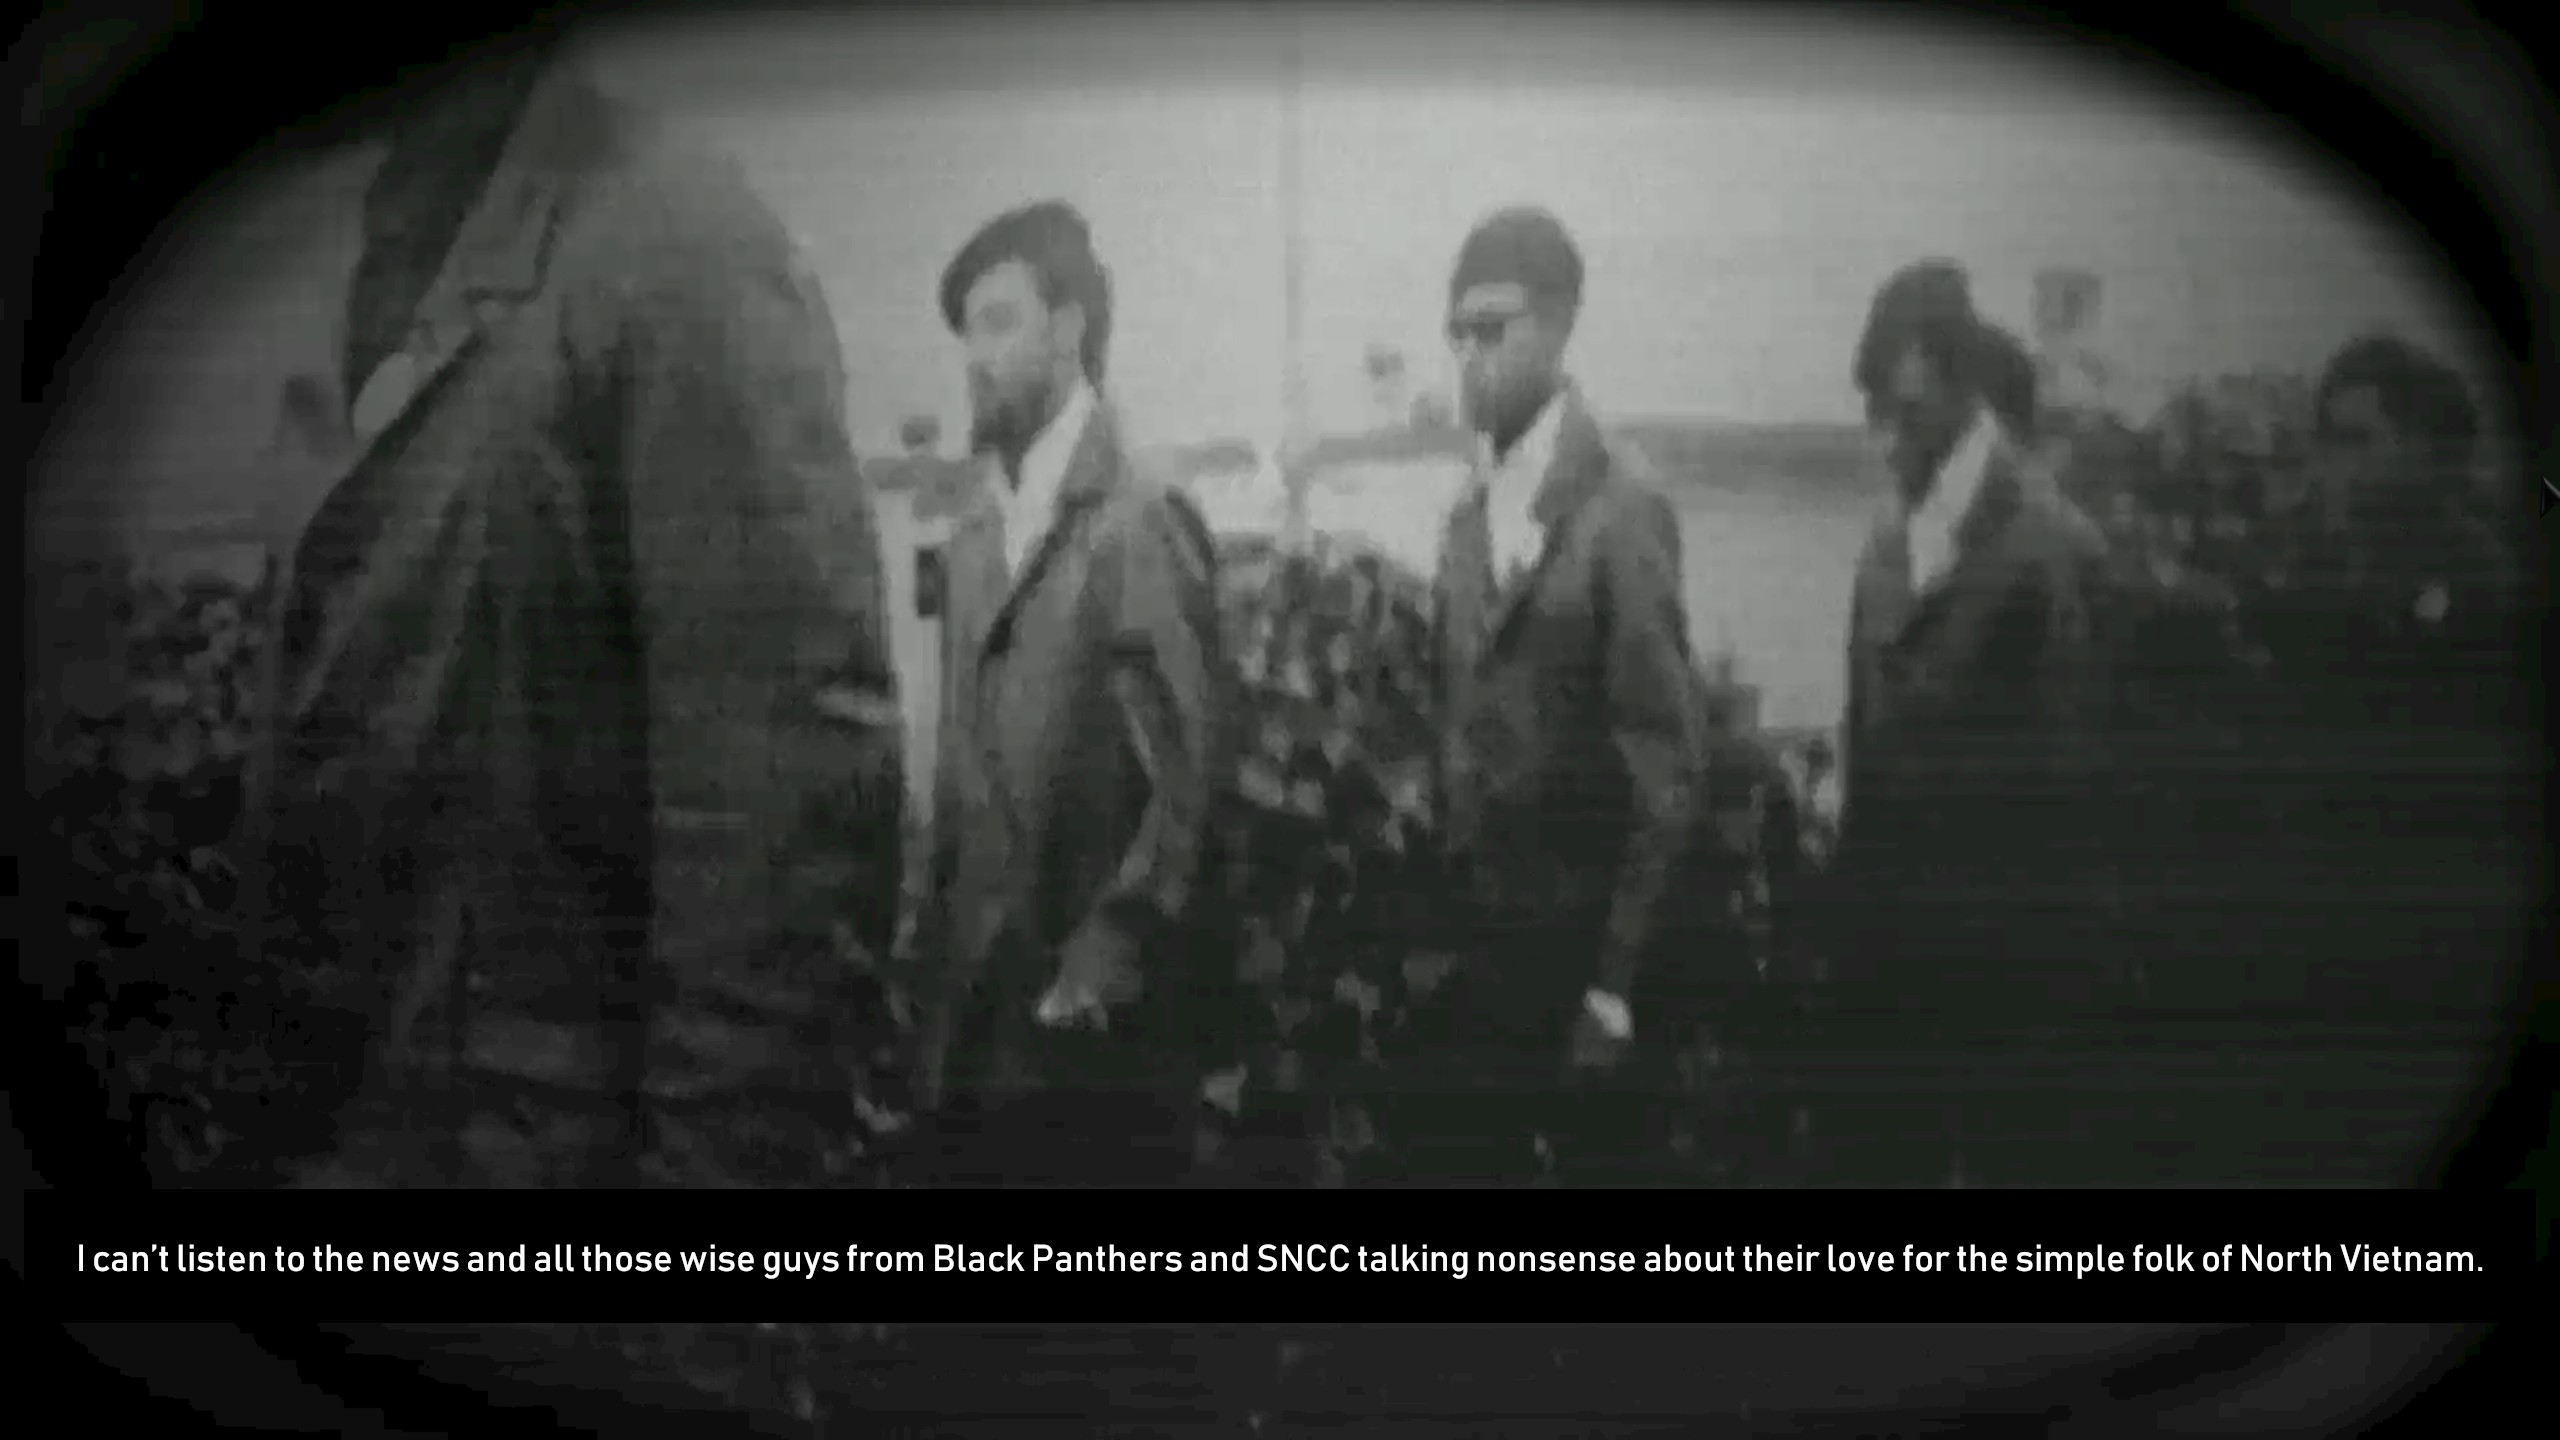 A screenshot of a cutscene from Radio Commander depicting old newsreel footage of Civil Rights activists in the 60s